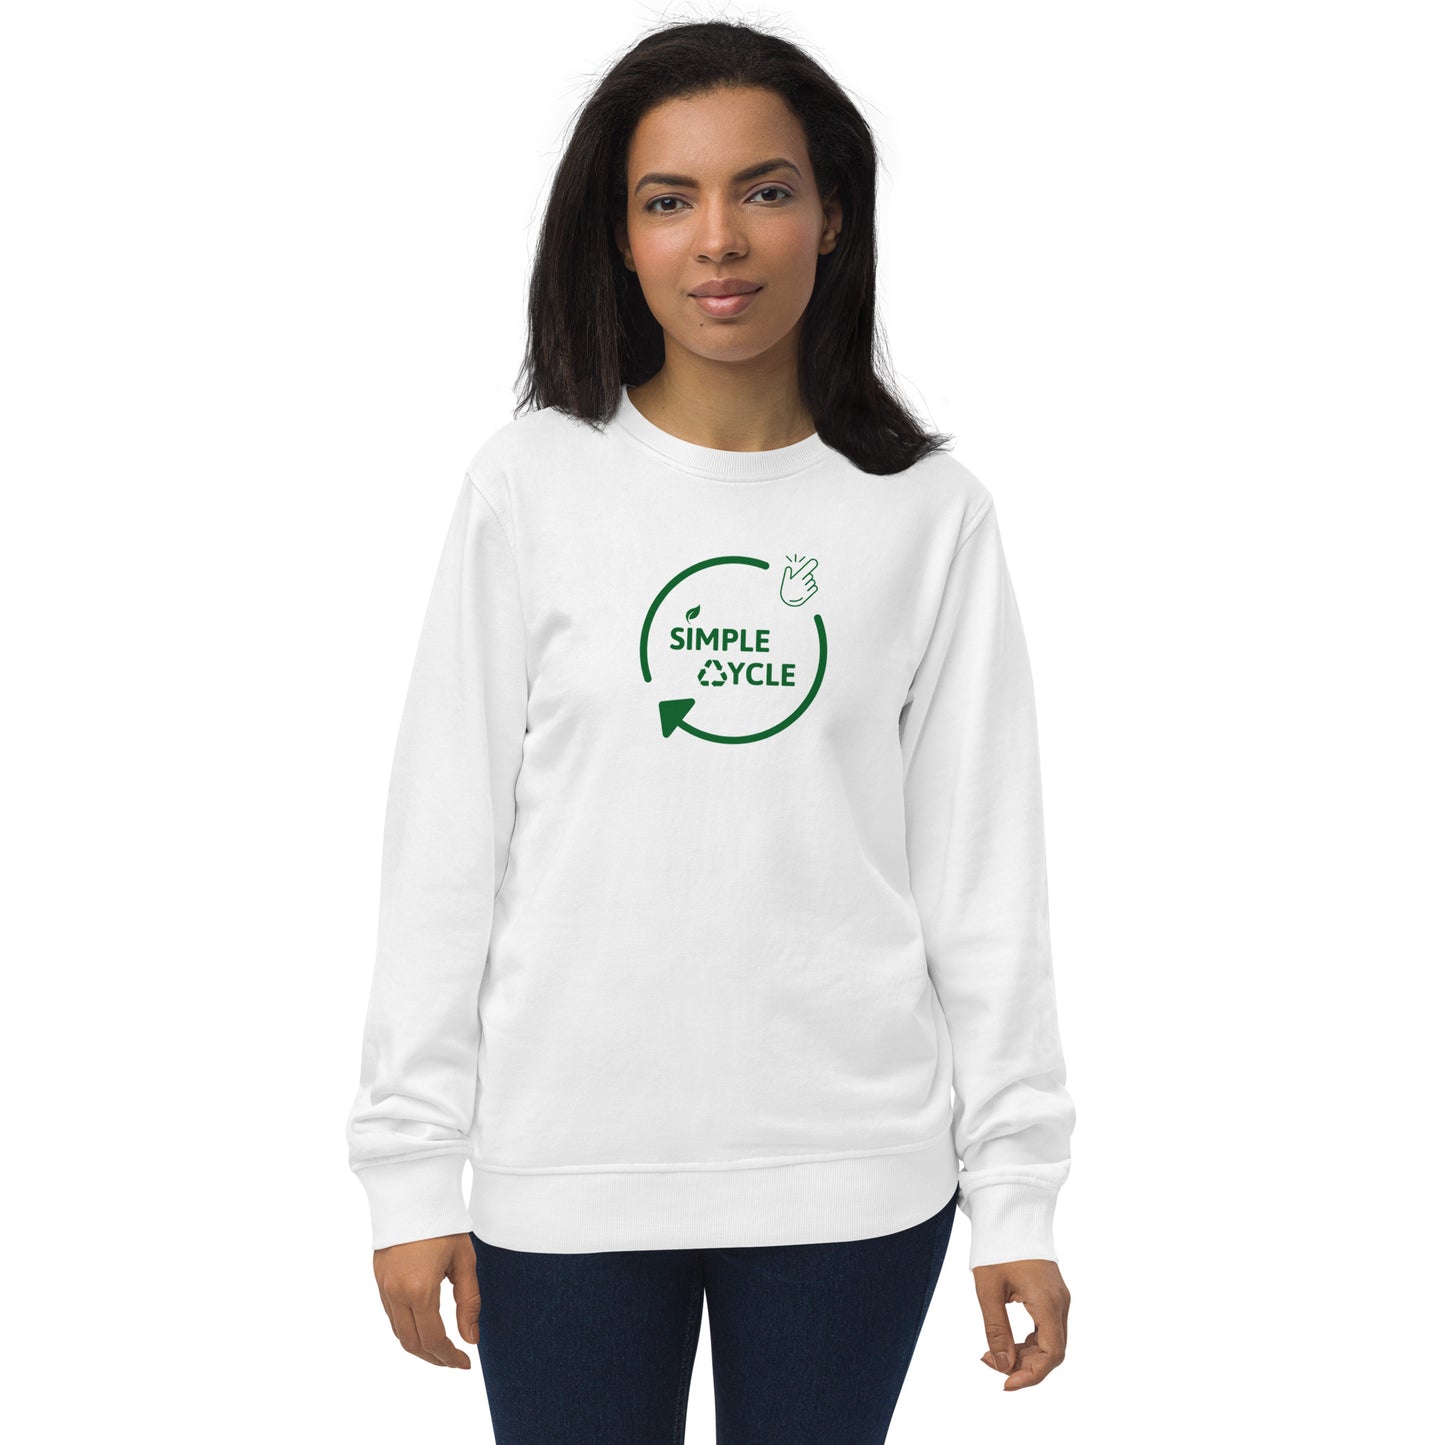 SimpleCycle Branded Unisex Organic Sweatshirt White front full model view